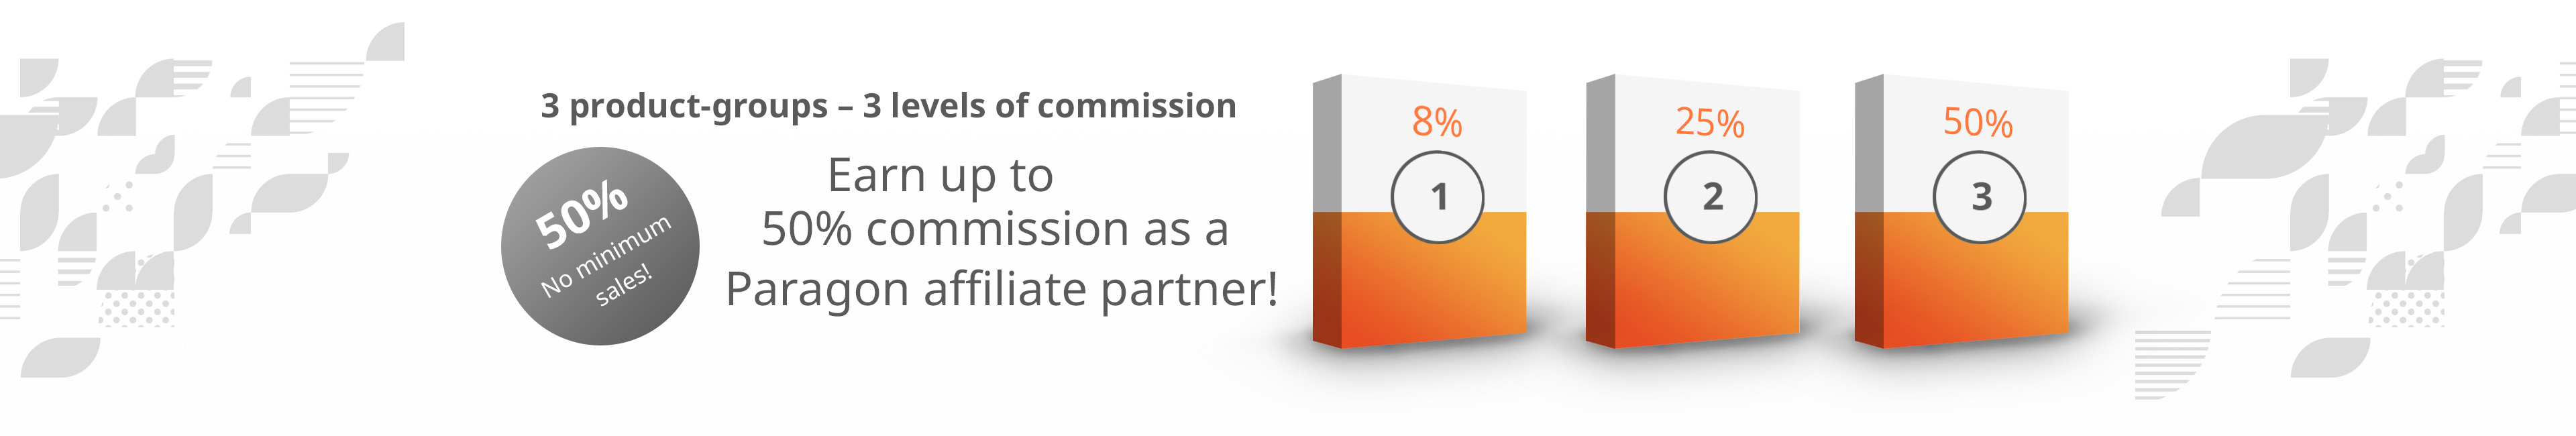 Choose level of commission as Paragon affiliate channel partner